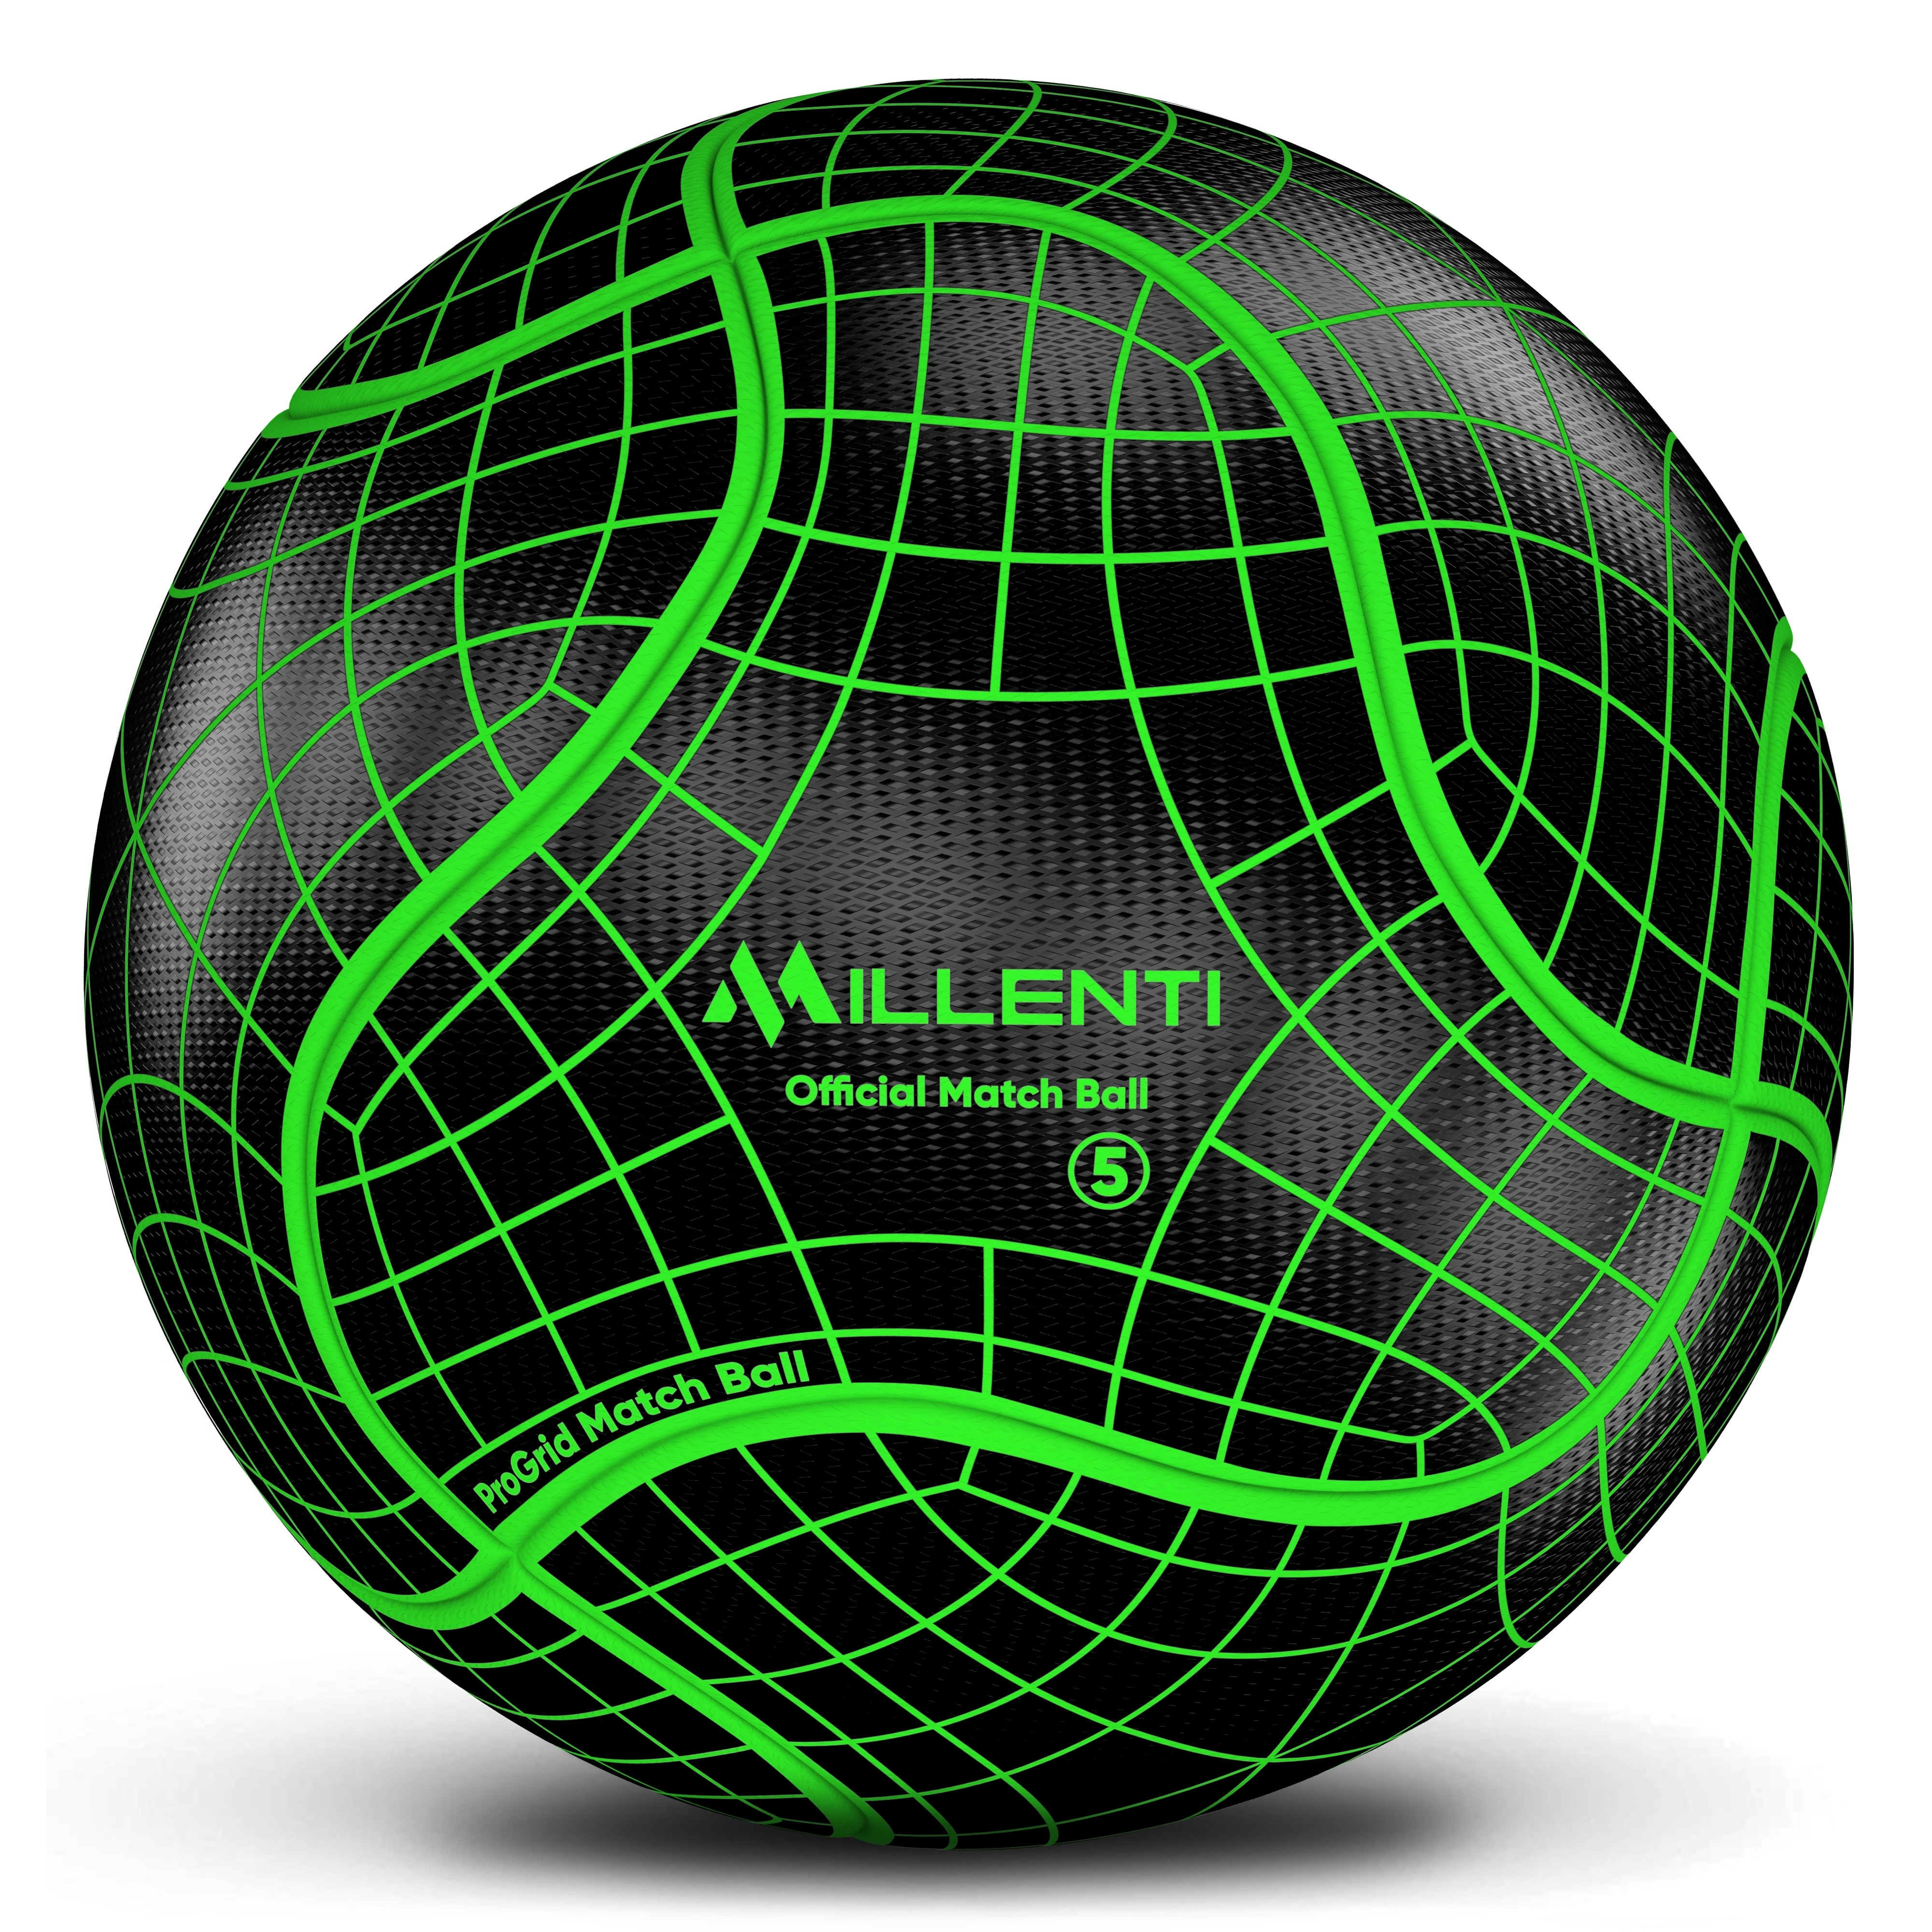 Millenti Soccer Balls Size 5 - ProGrid Official Match Soccer Ball With High-Visibility, Easy-To-Track Designs, Black Green SoccerBall, SB0905G